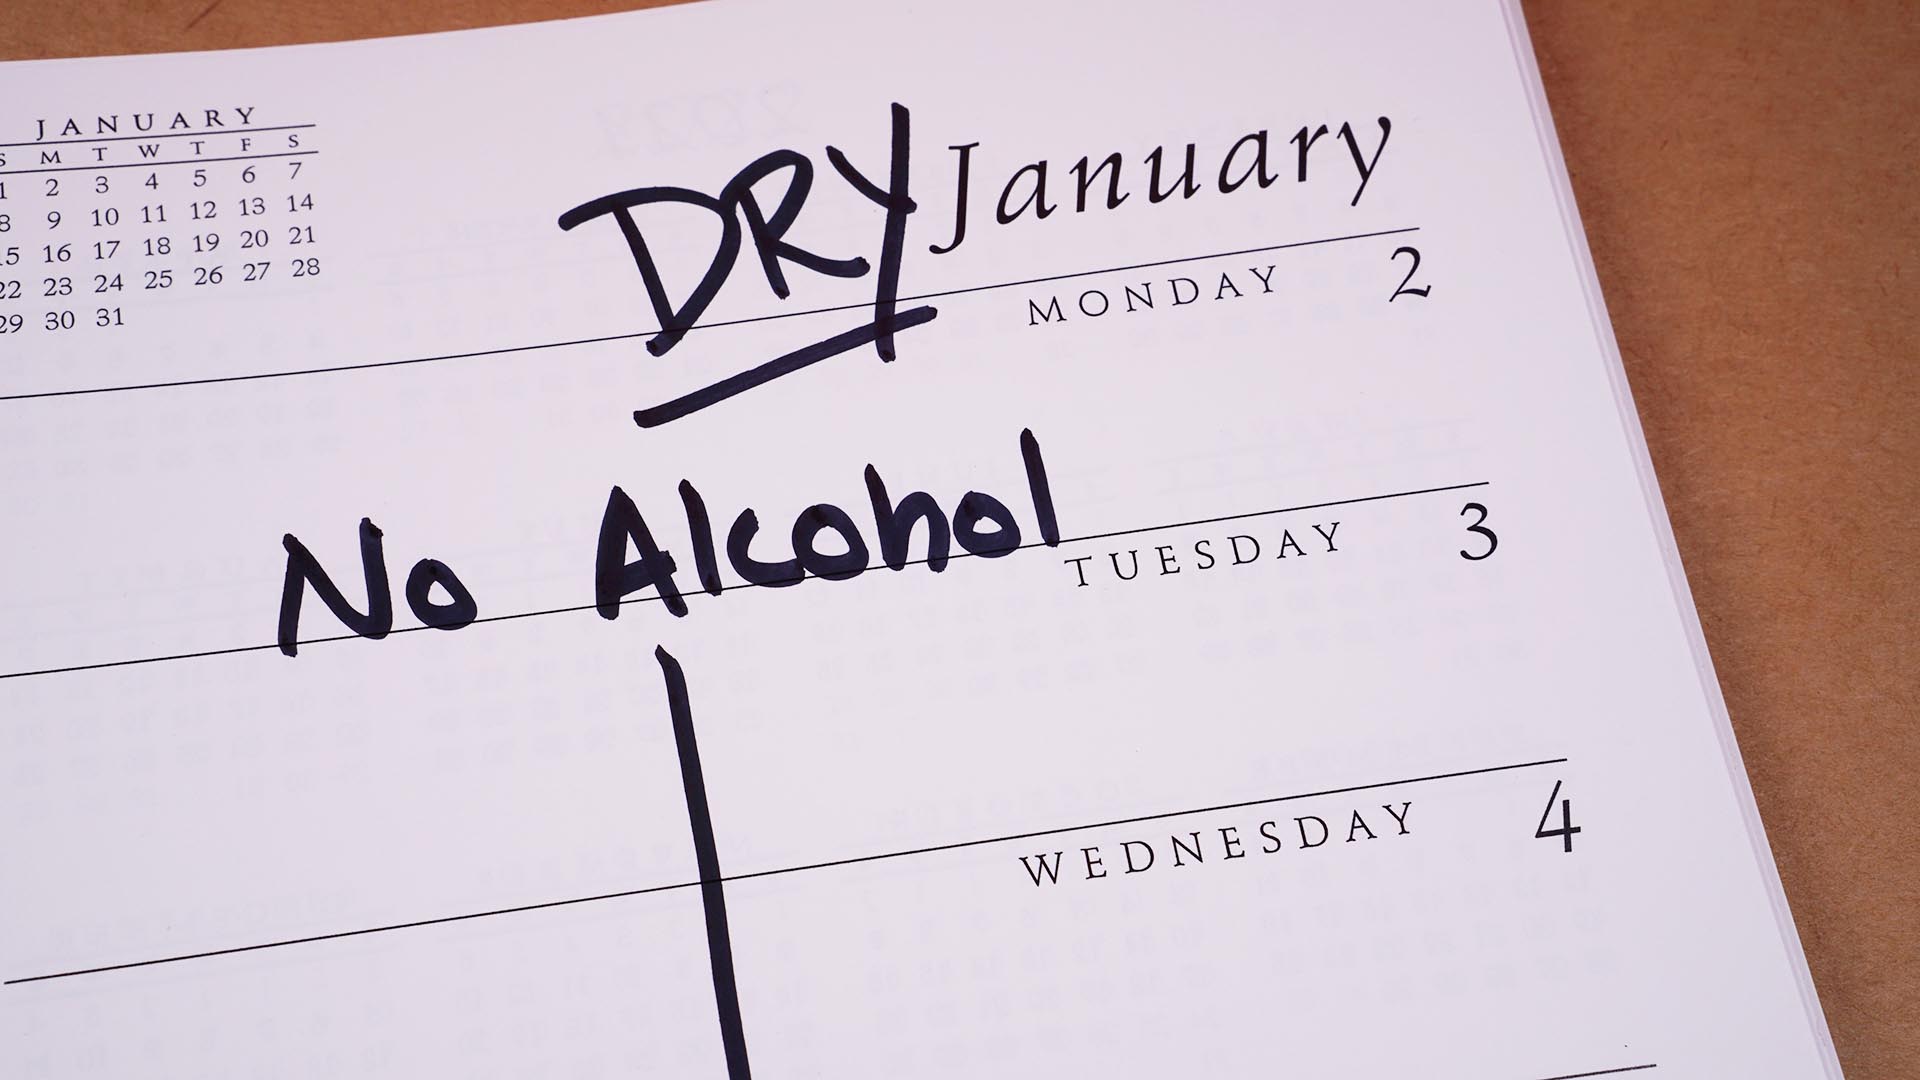 Calendar marked to indicate that January is Dry January - a month to stay sober and alcohol-free.